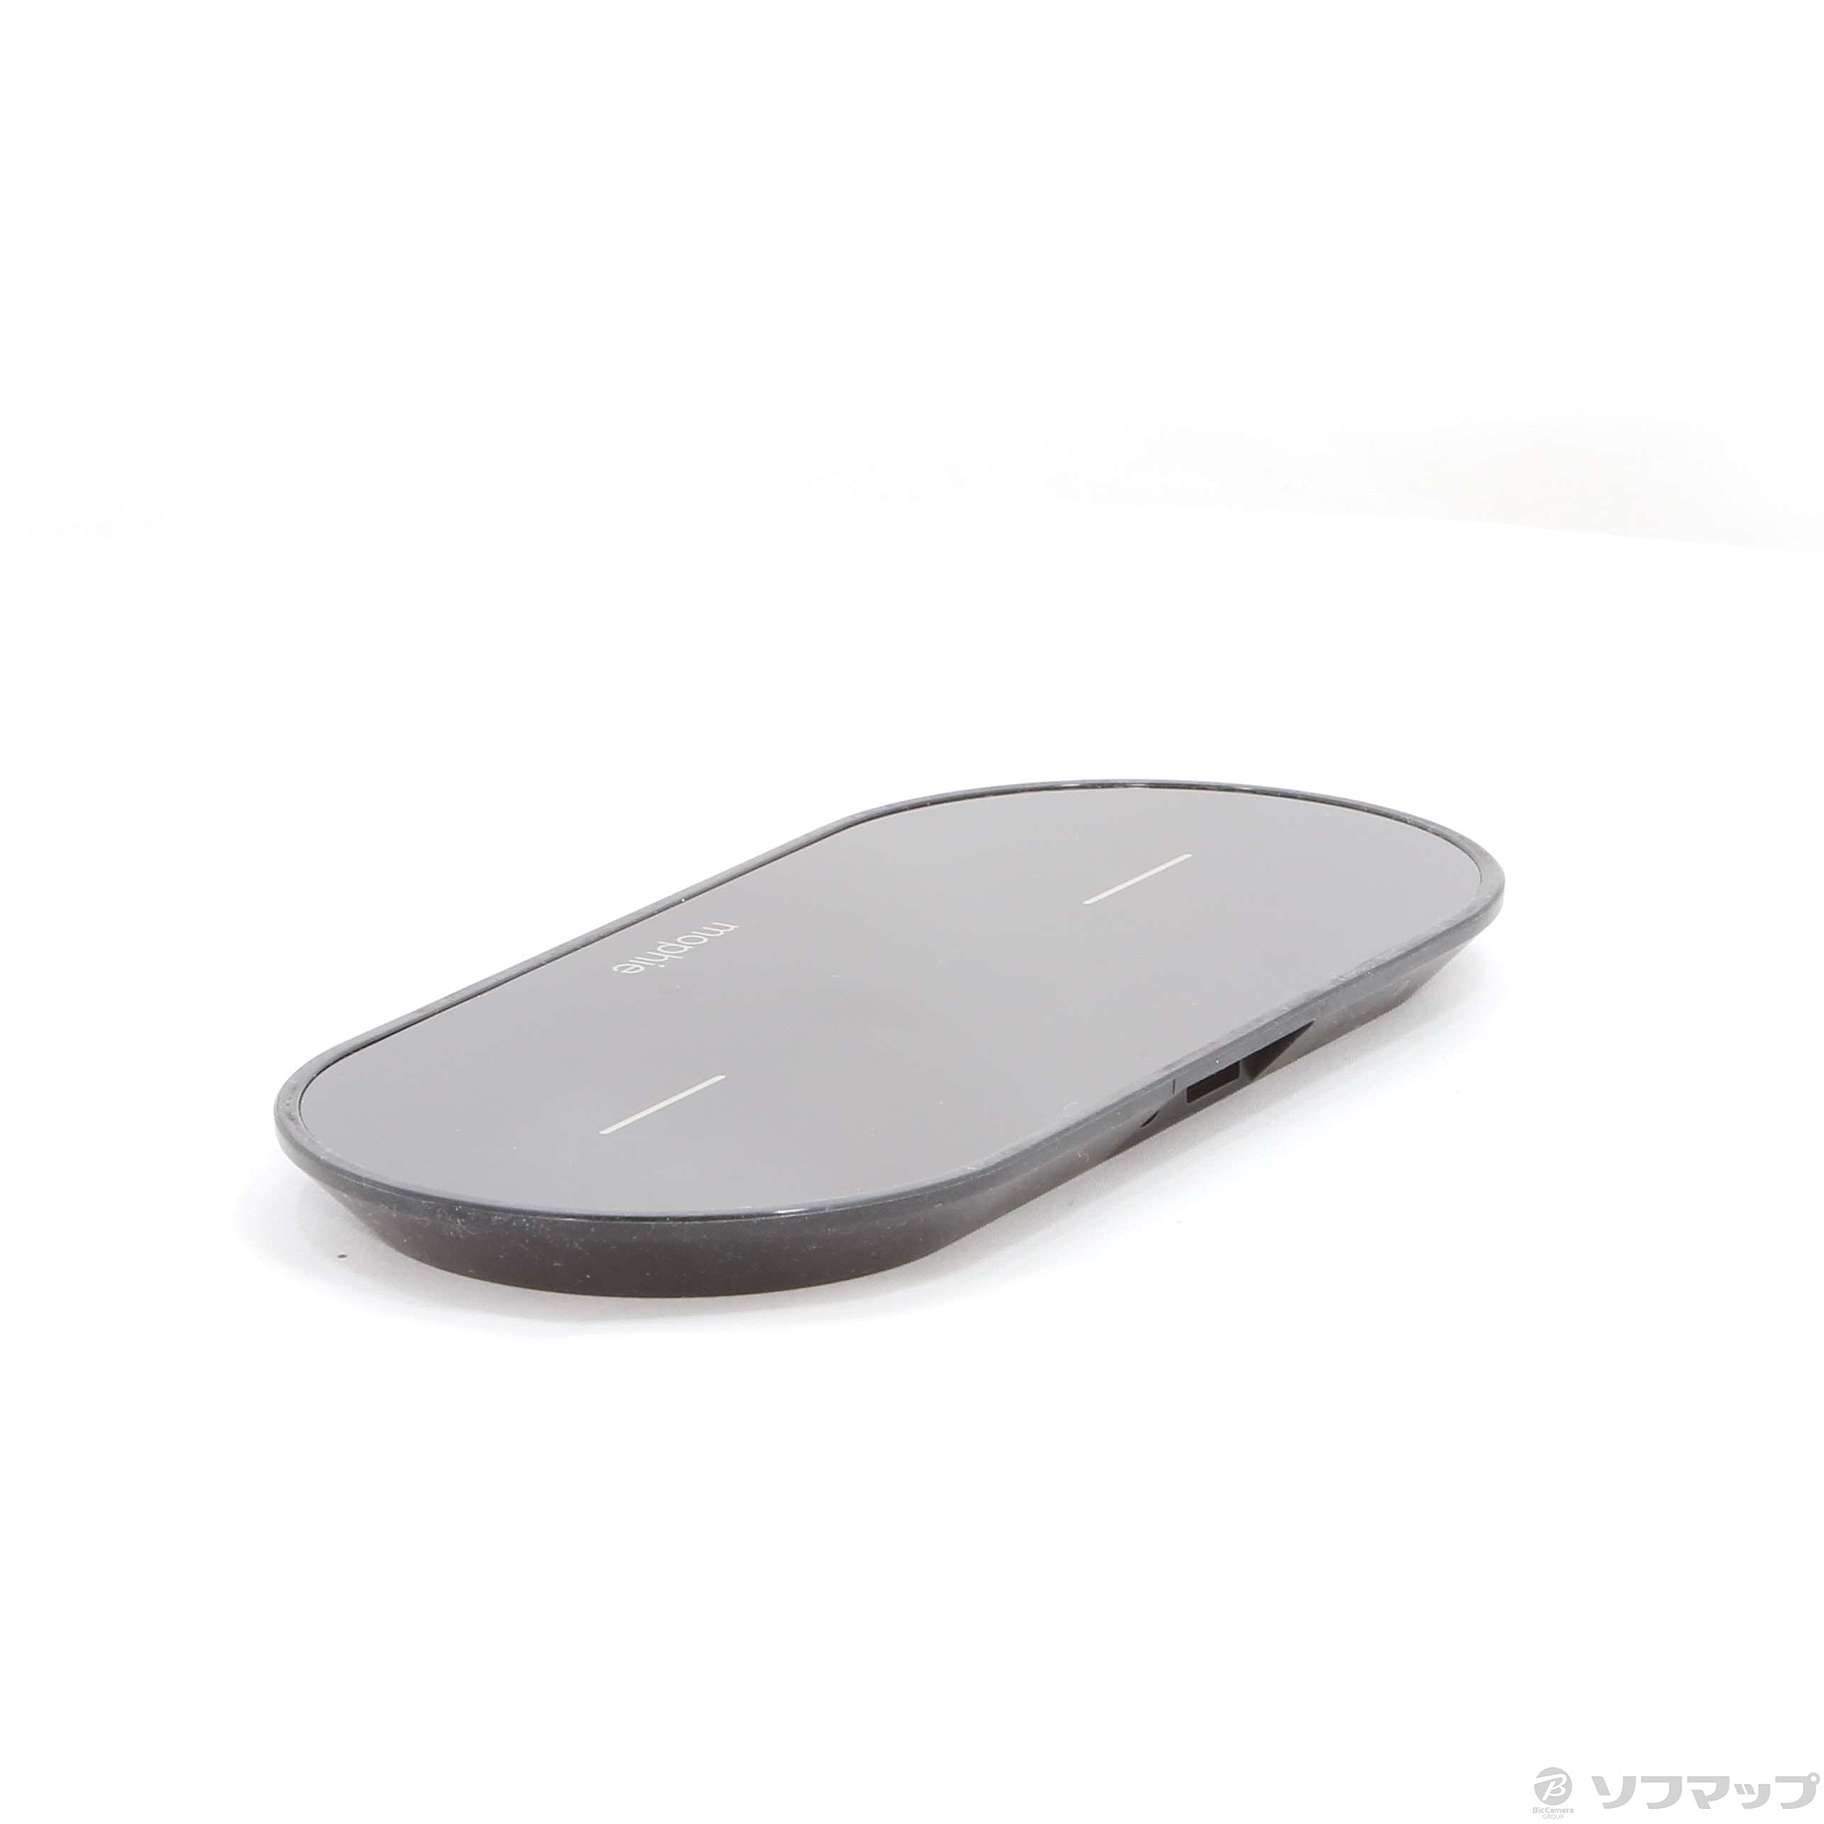 mophie dual wireless charging pad